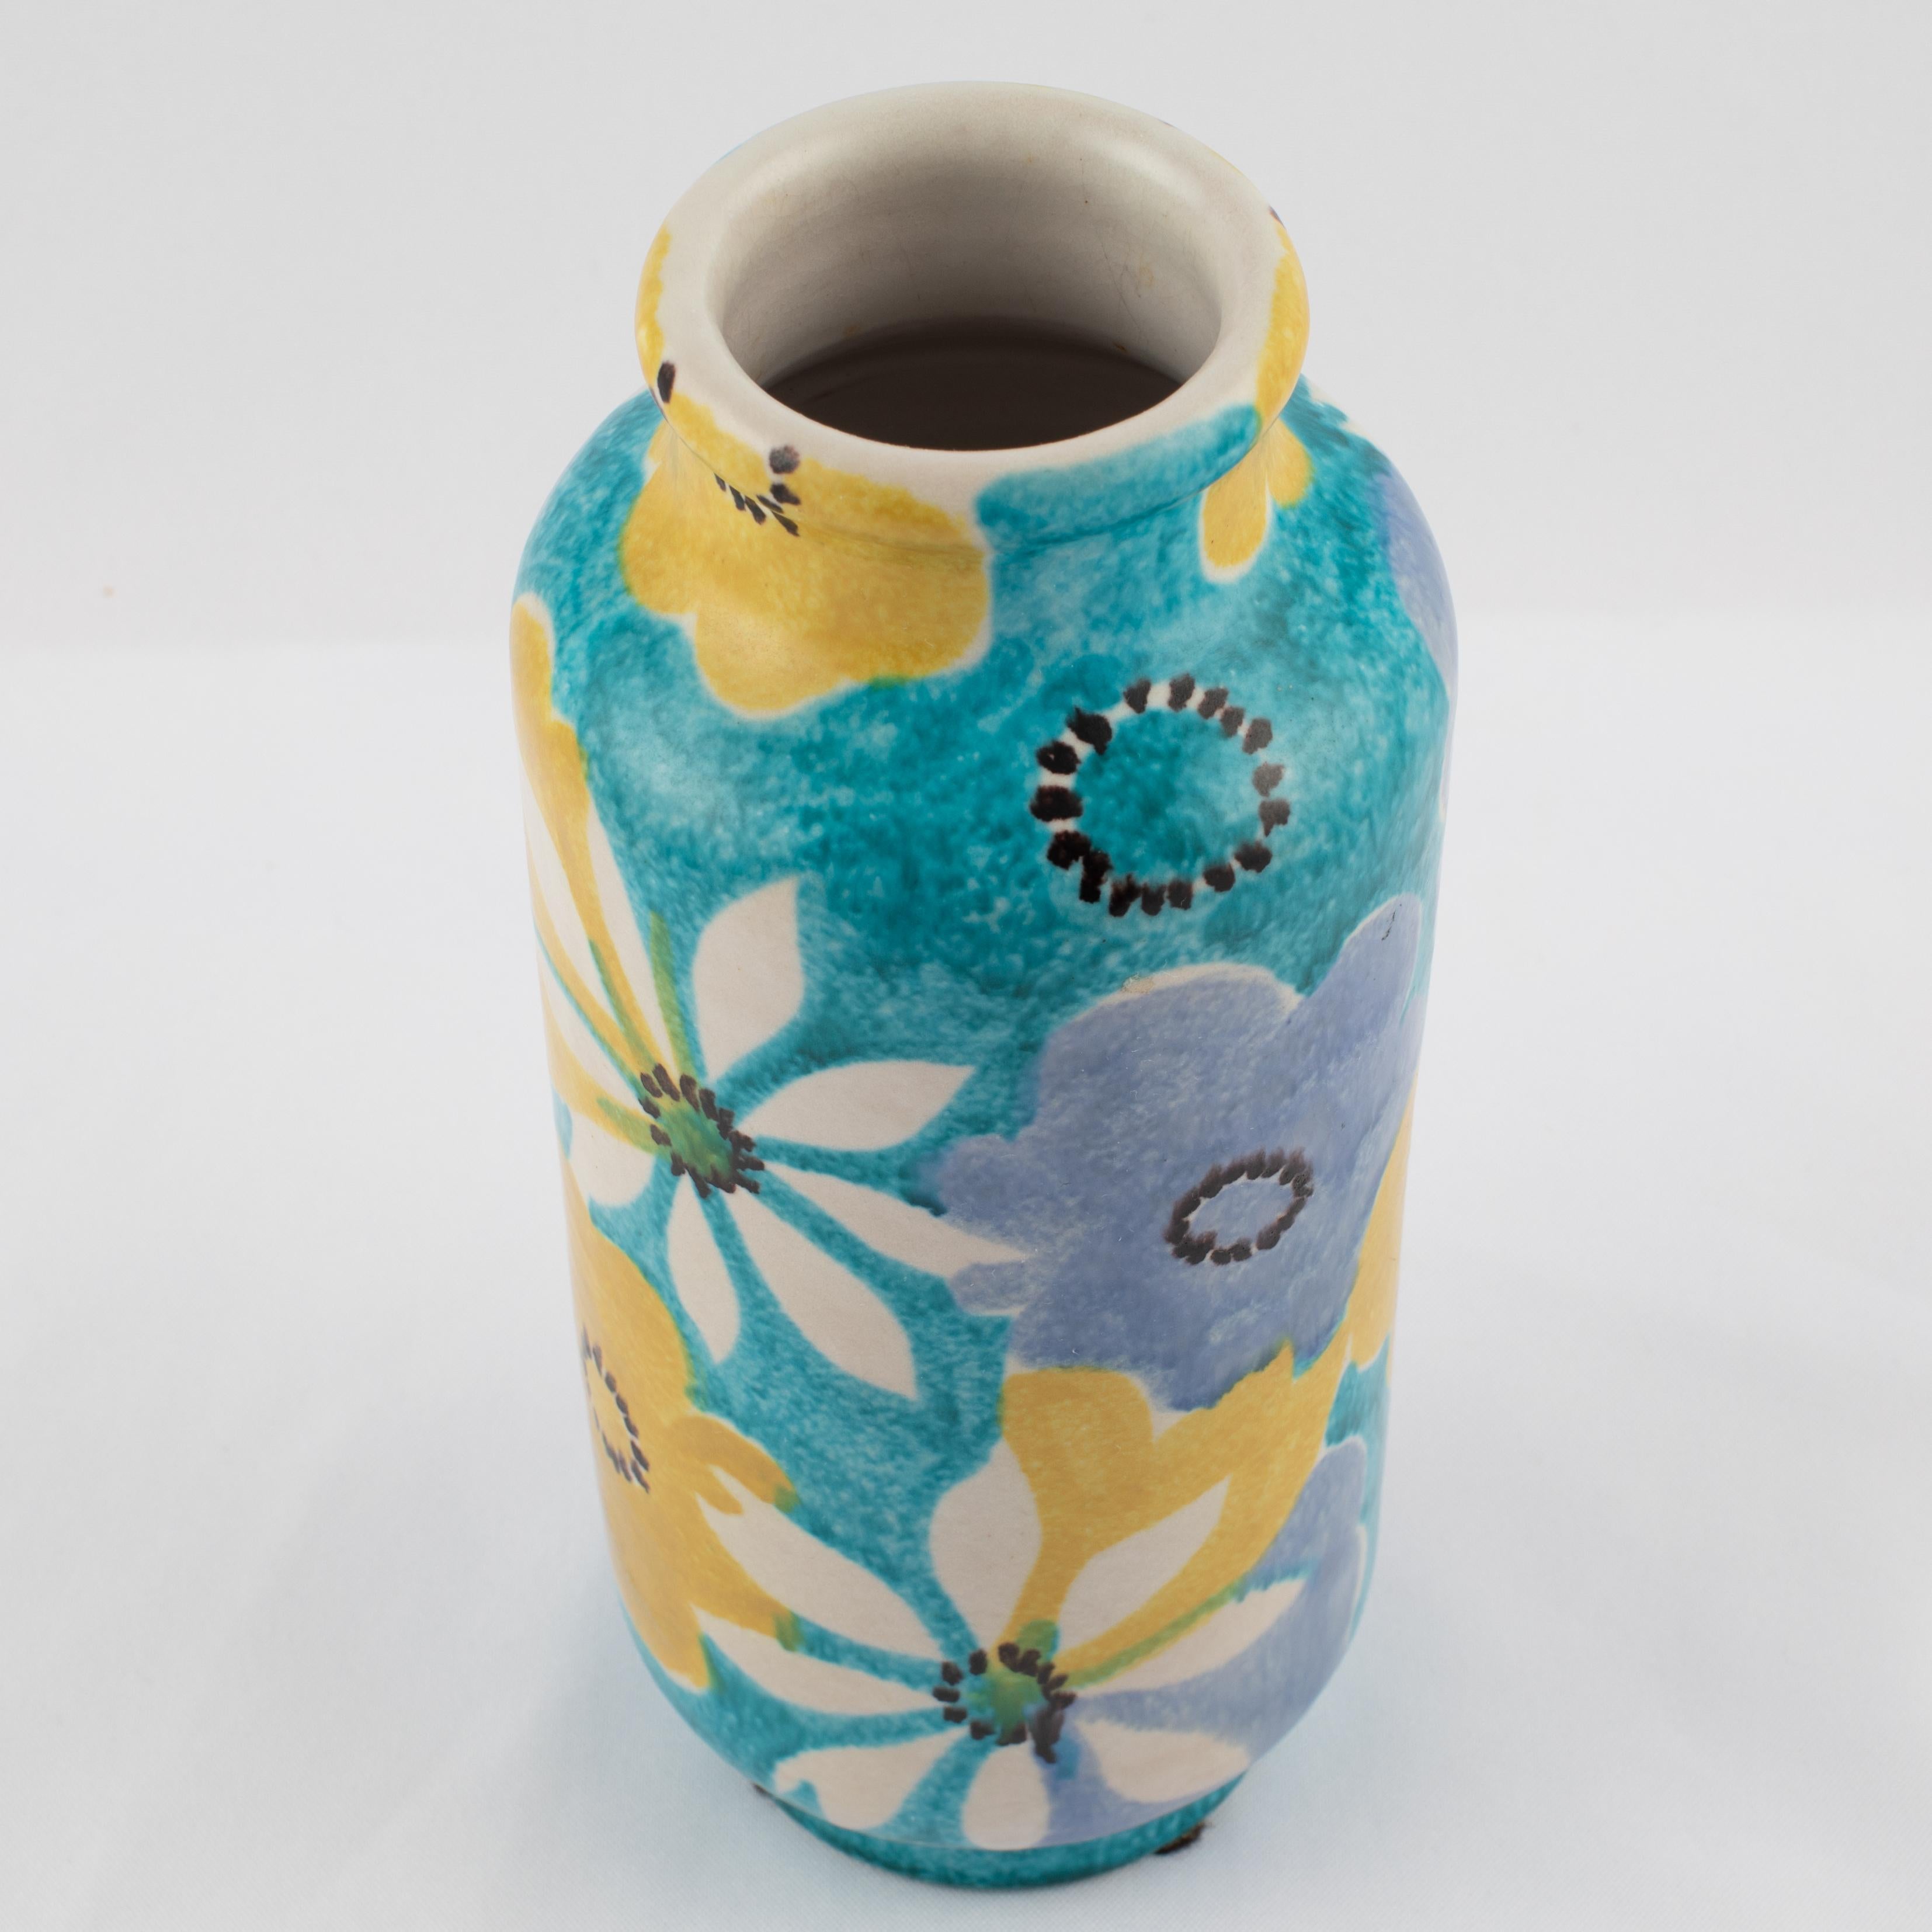 Lovely cylindrical vase glazed with hand painted blue, white and yellow flowers on an aqua background, by Italian ceramicist Alvino Bagni for American importer Raymor. Signed 